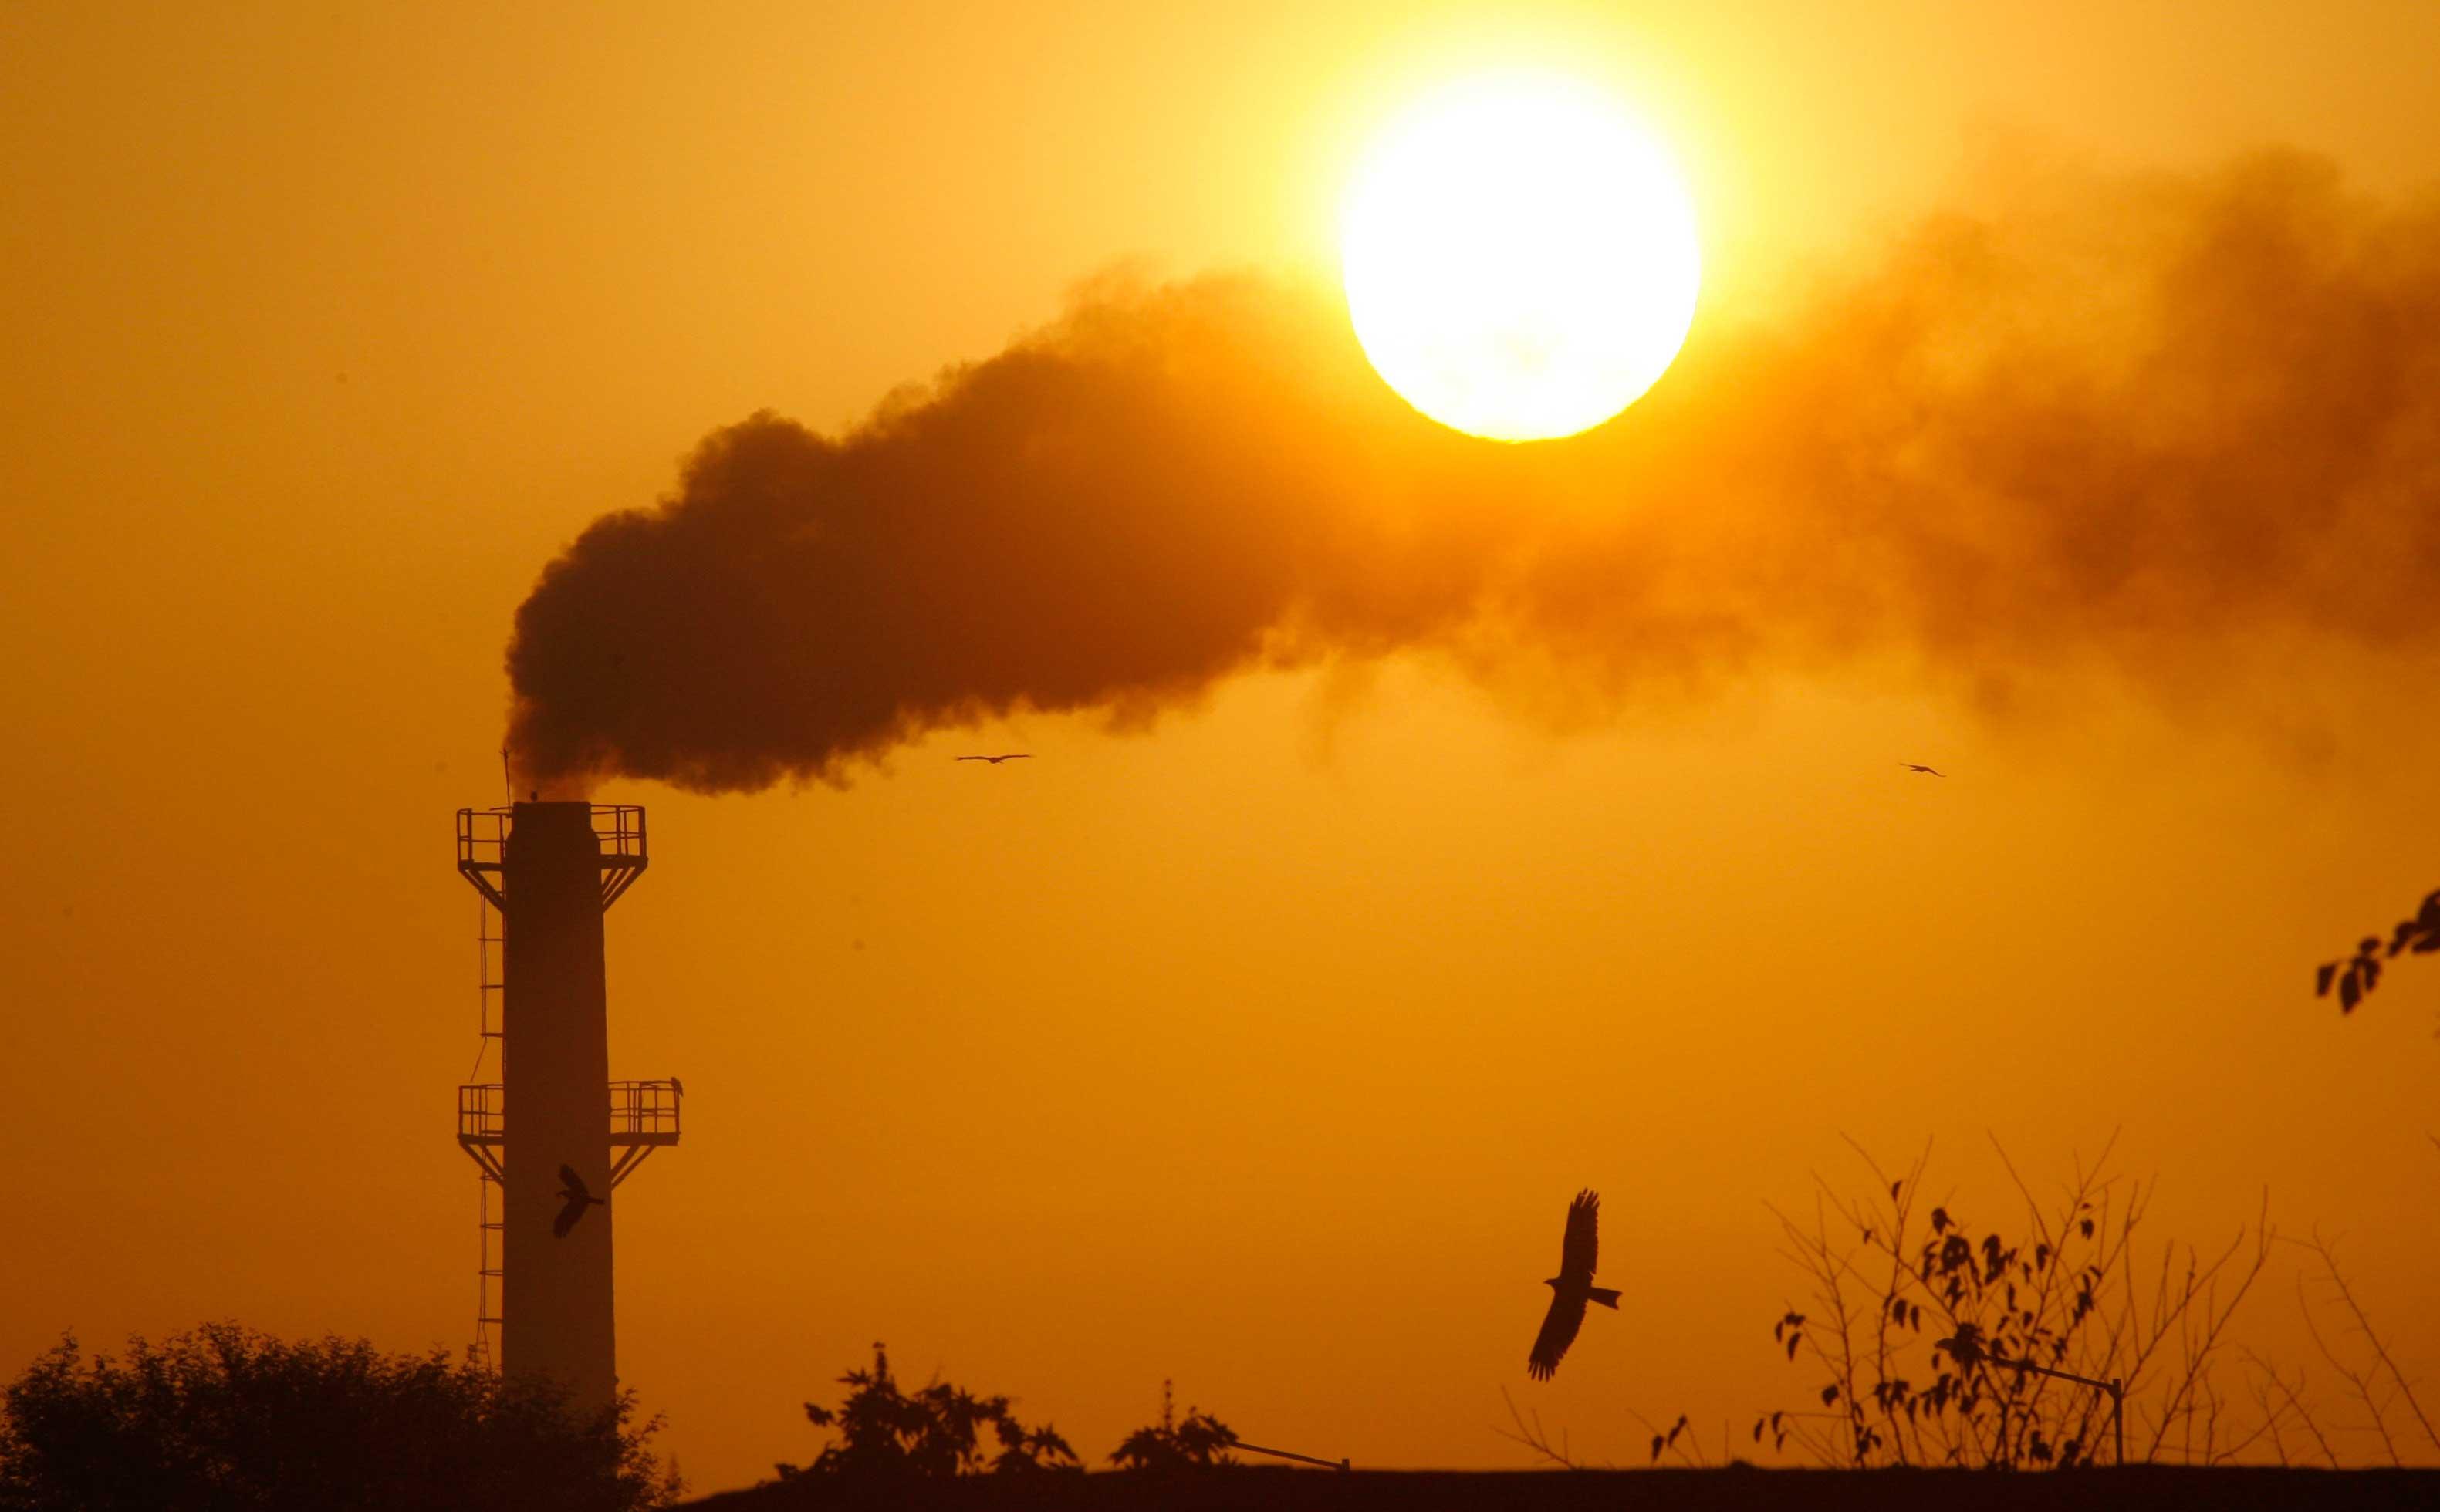 India commits 33-35% cut in carbon intensity by 2030